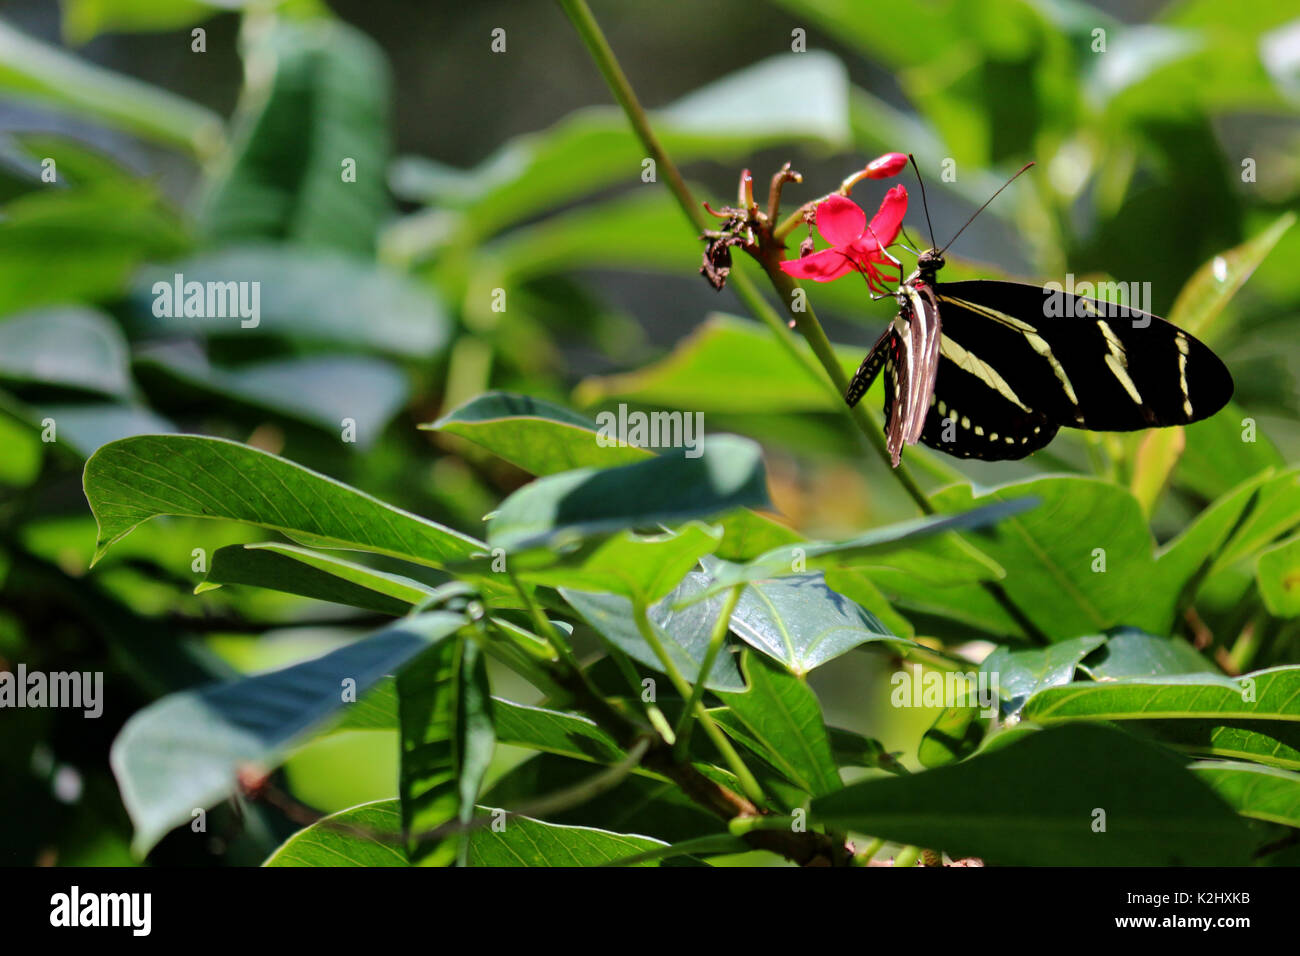 A Zebra Longwing Butterfly on Pink Flowers with a Natural Leafy Green Background Stock Photo